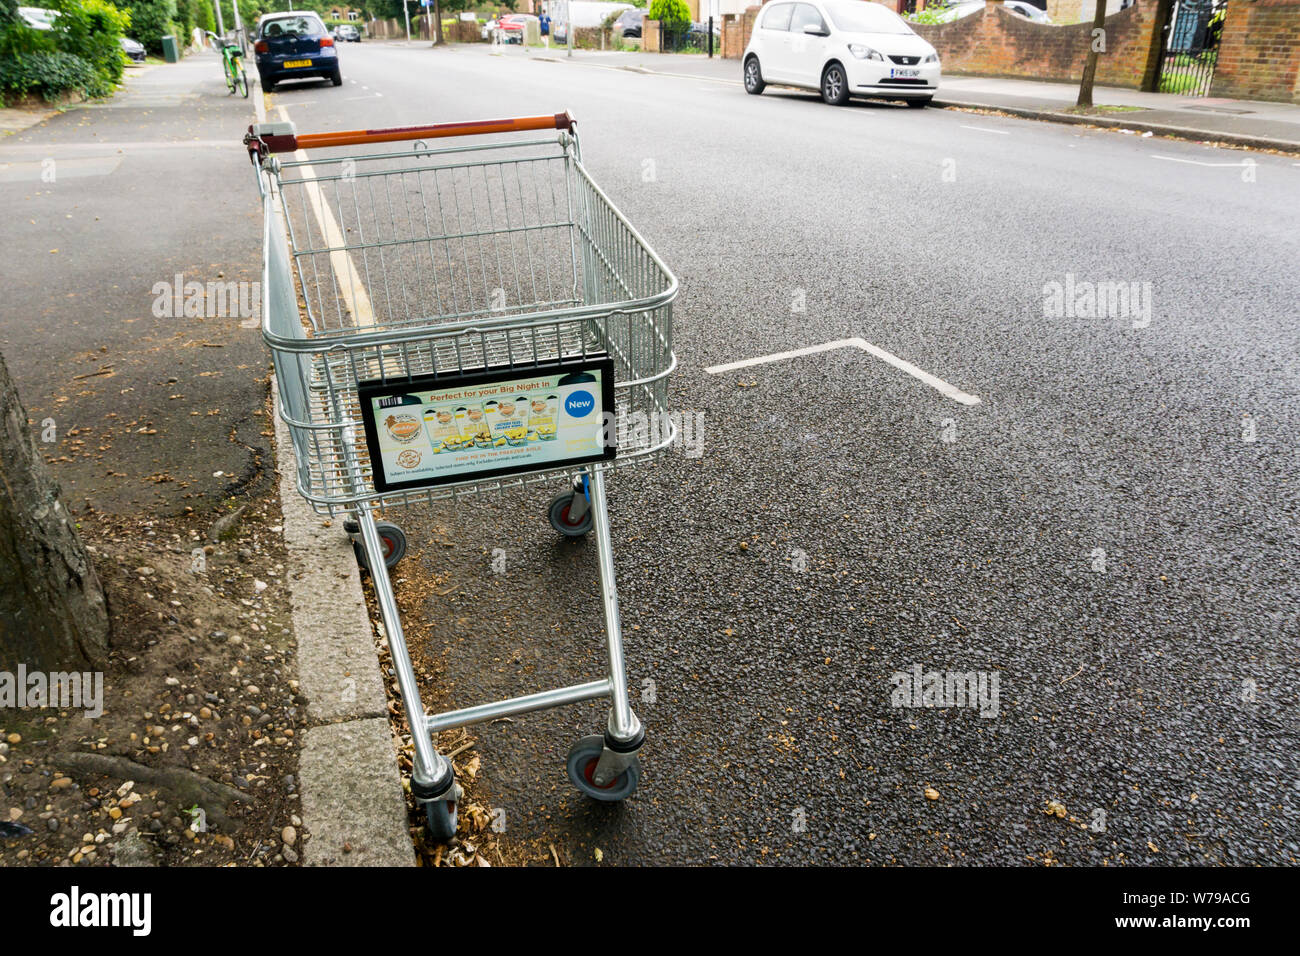 An abandoned supermarket trolley in a suburban residential street. Stock Photo